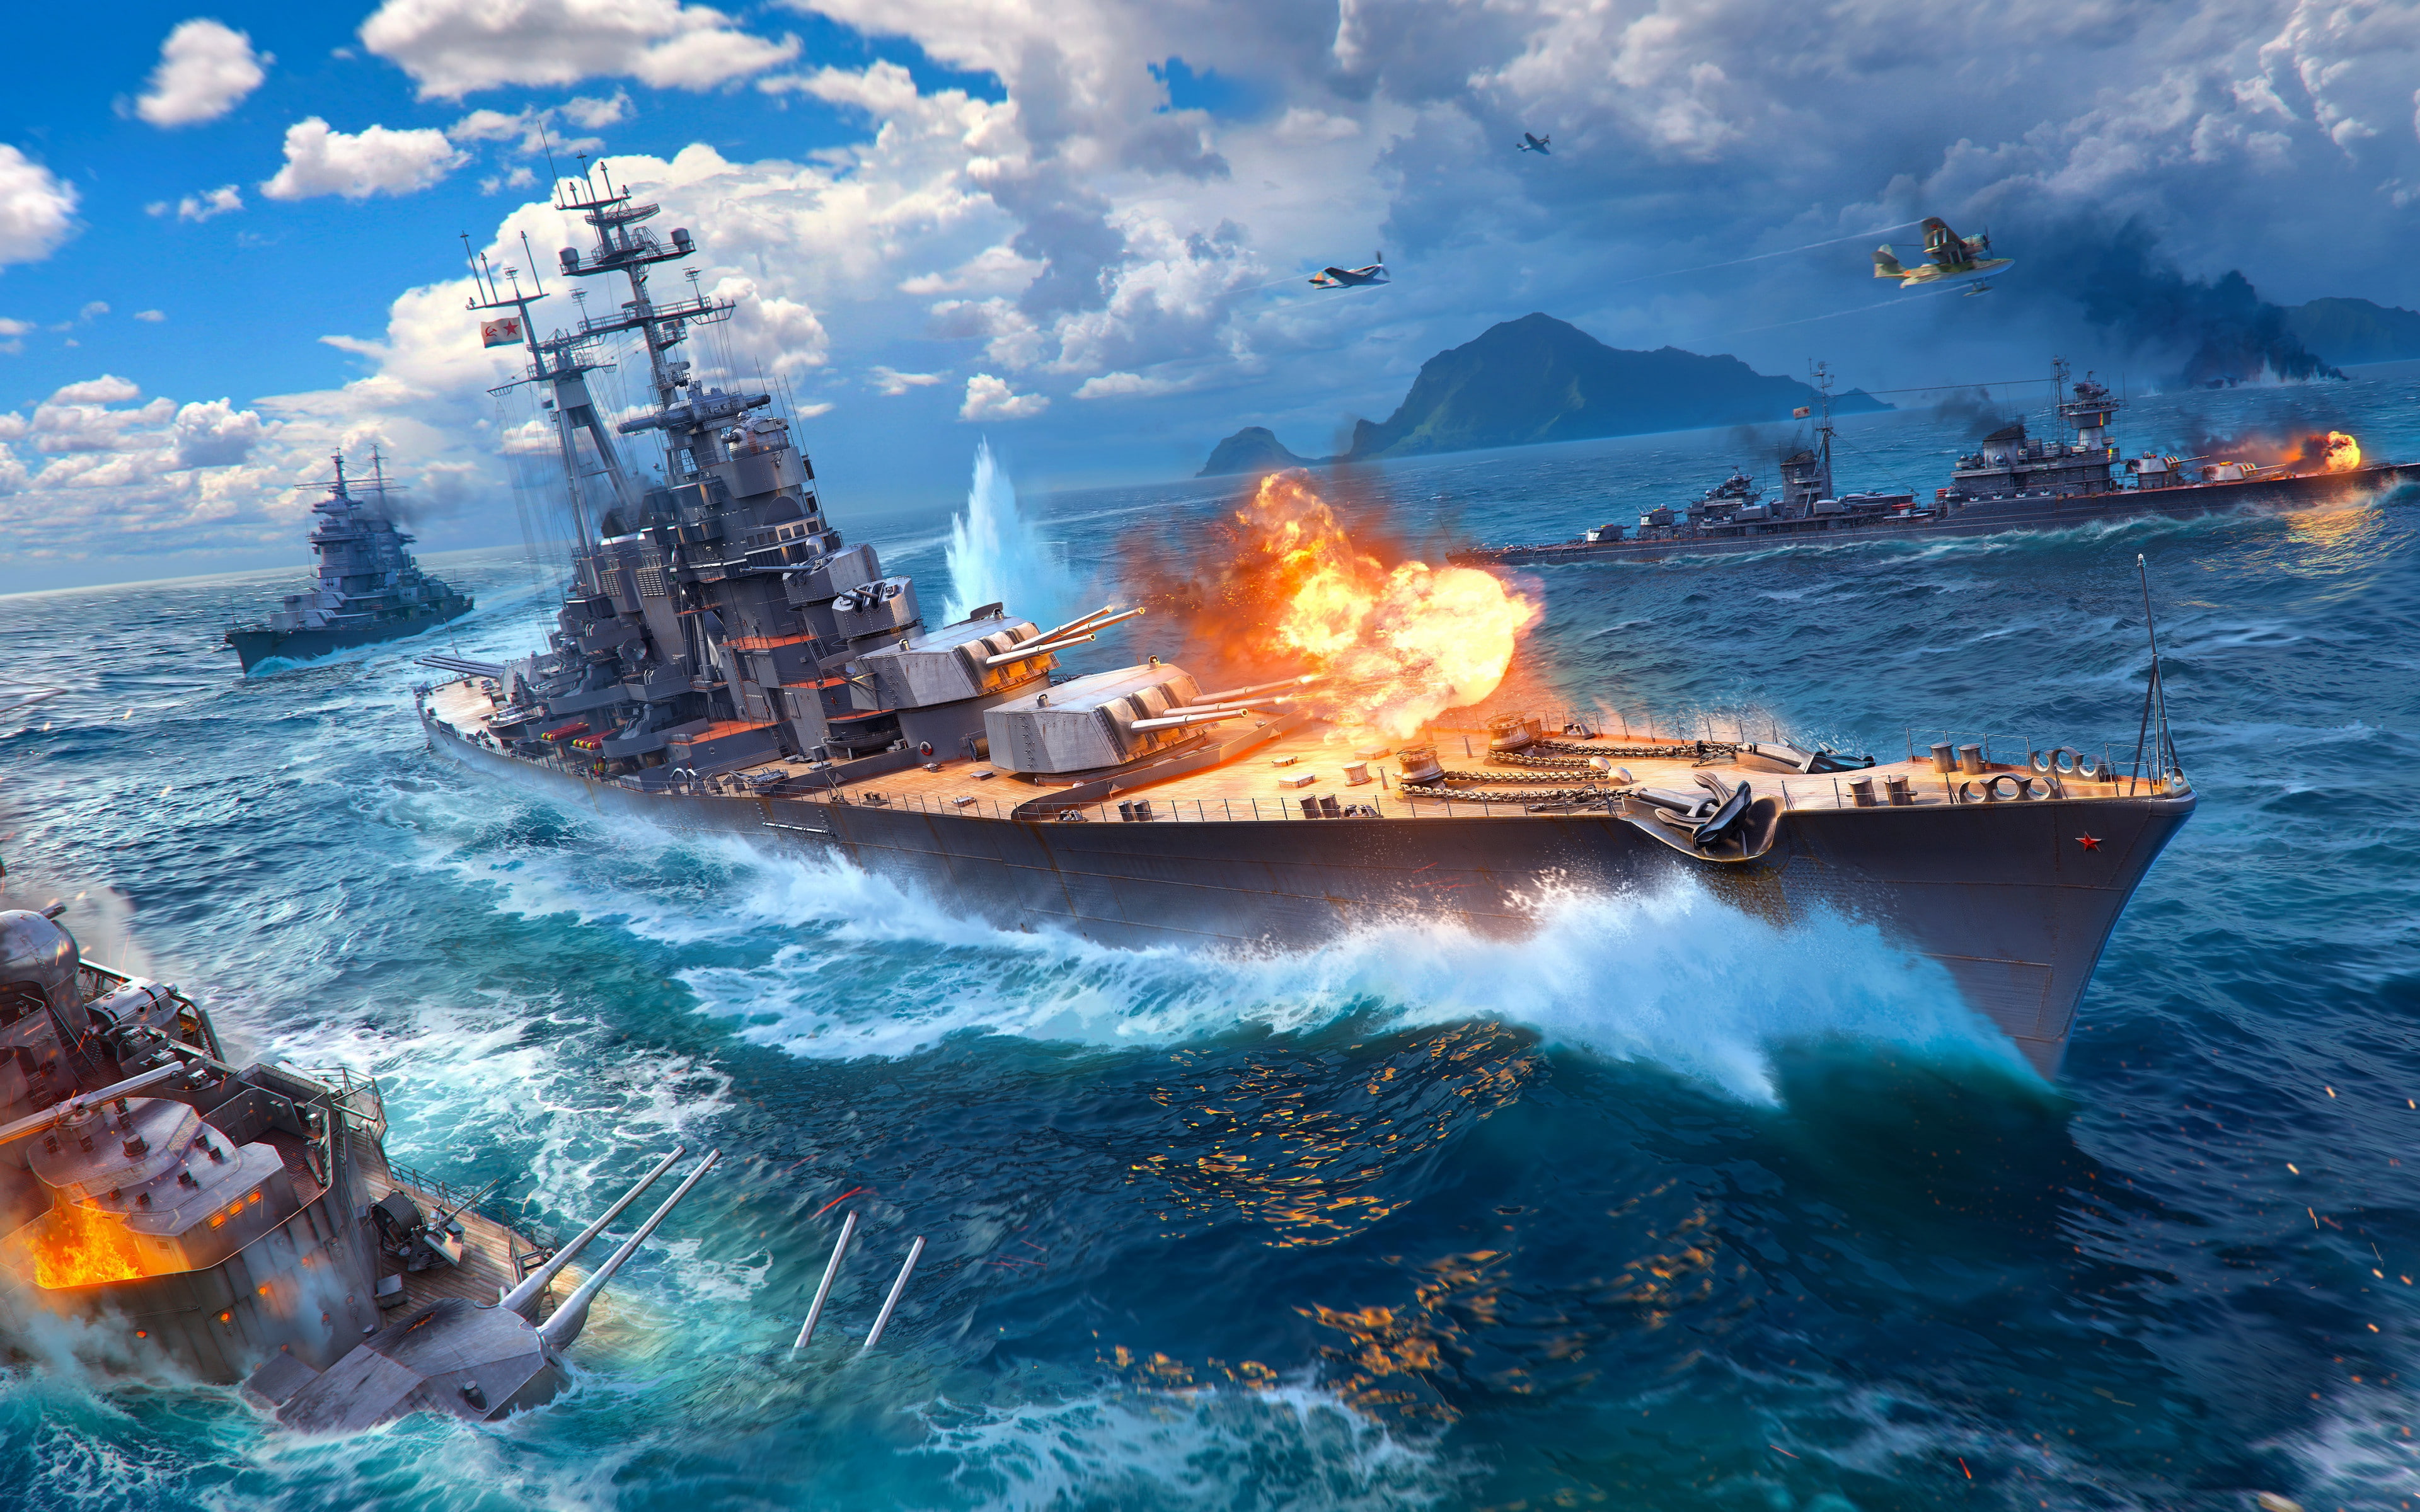 orld of warships, wargaming net backgrounds, explosion, Download 3840x2400 world of warships